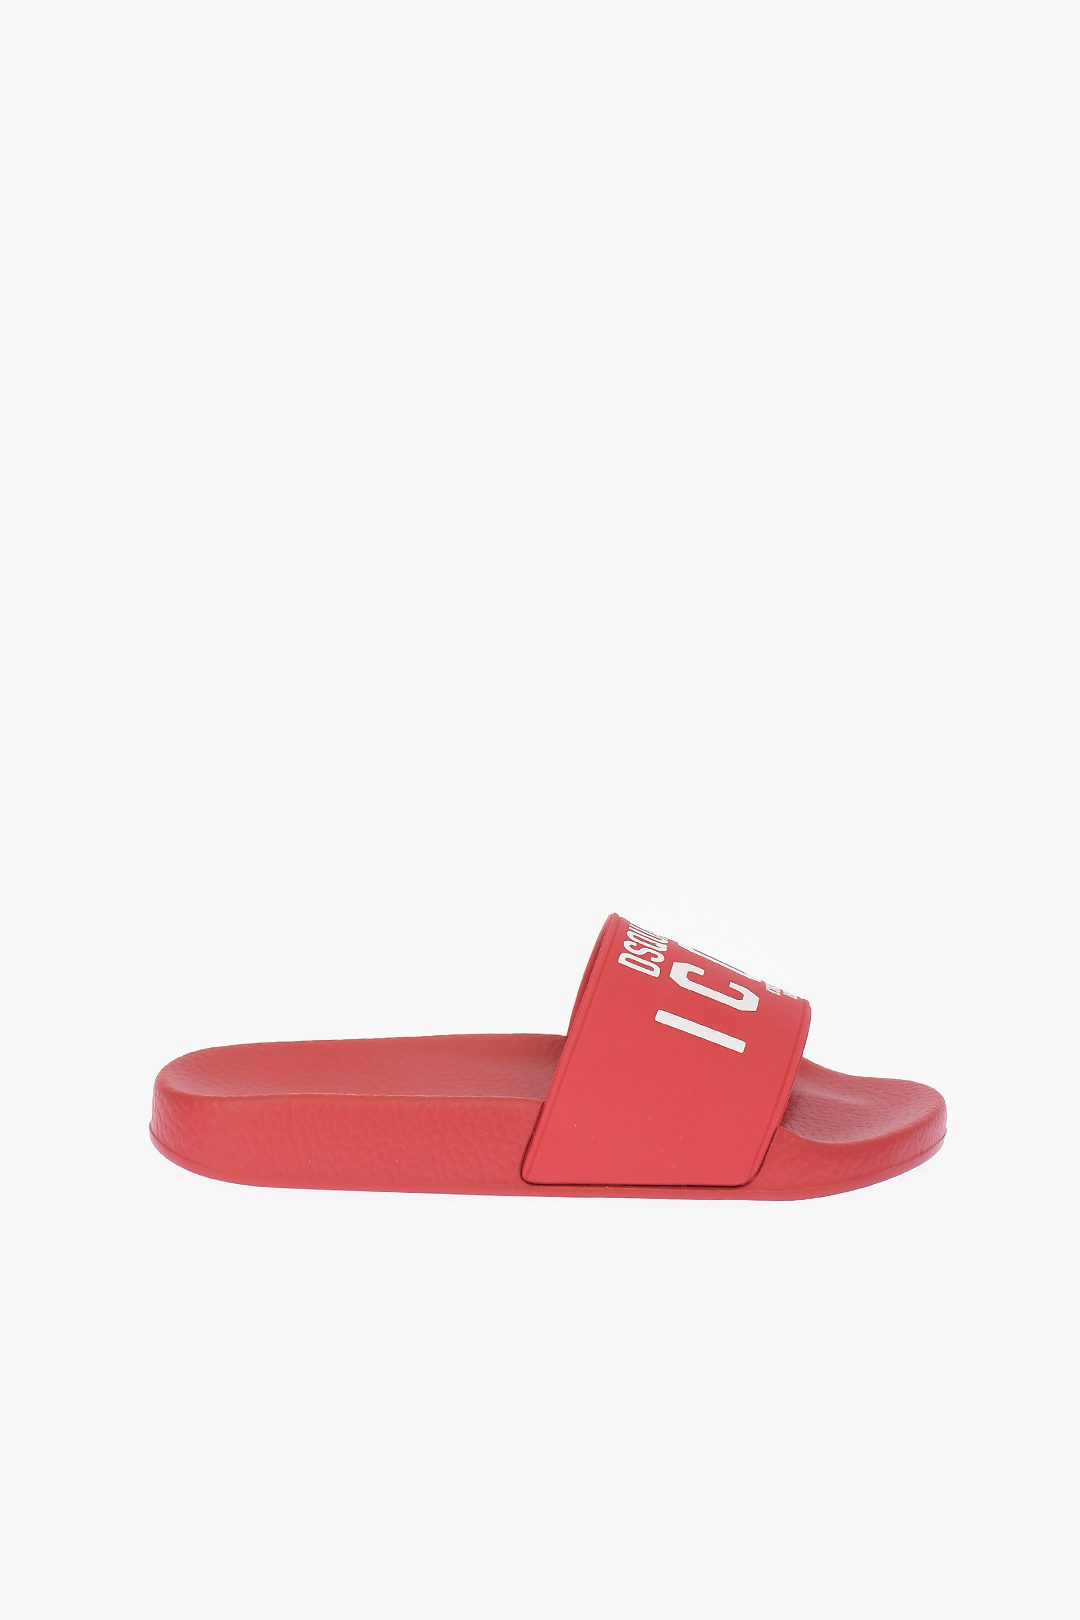 Dsquared2 Rubber DUNE Slides with Logo women - Glamood Outlet